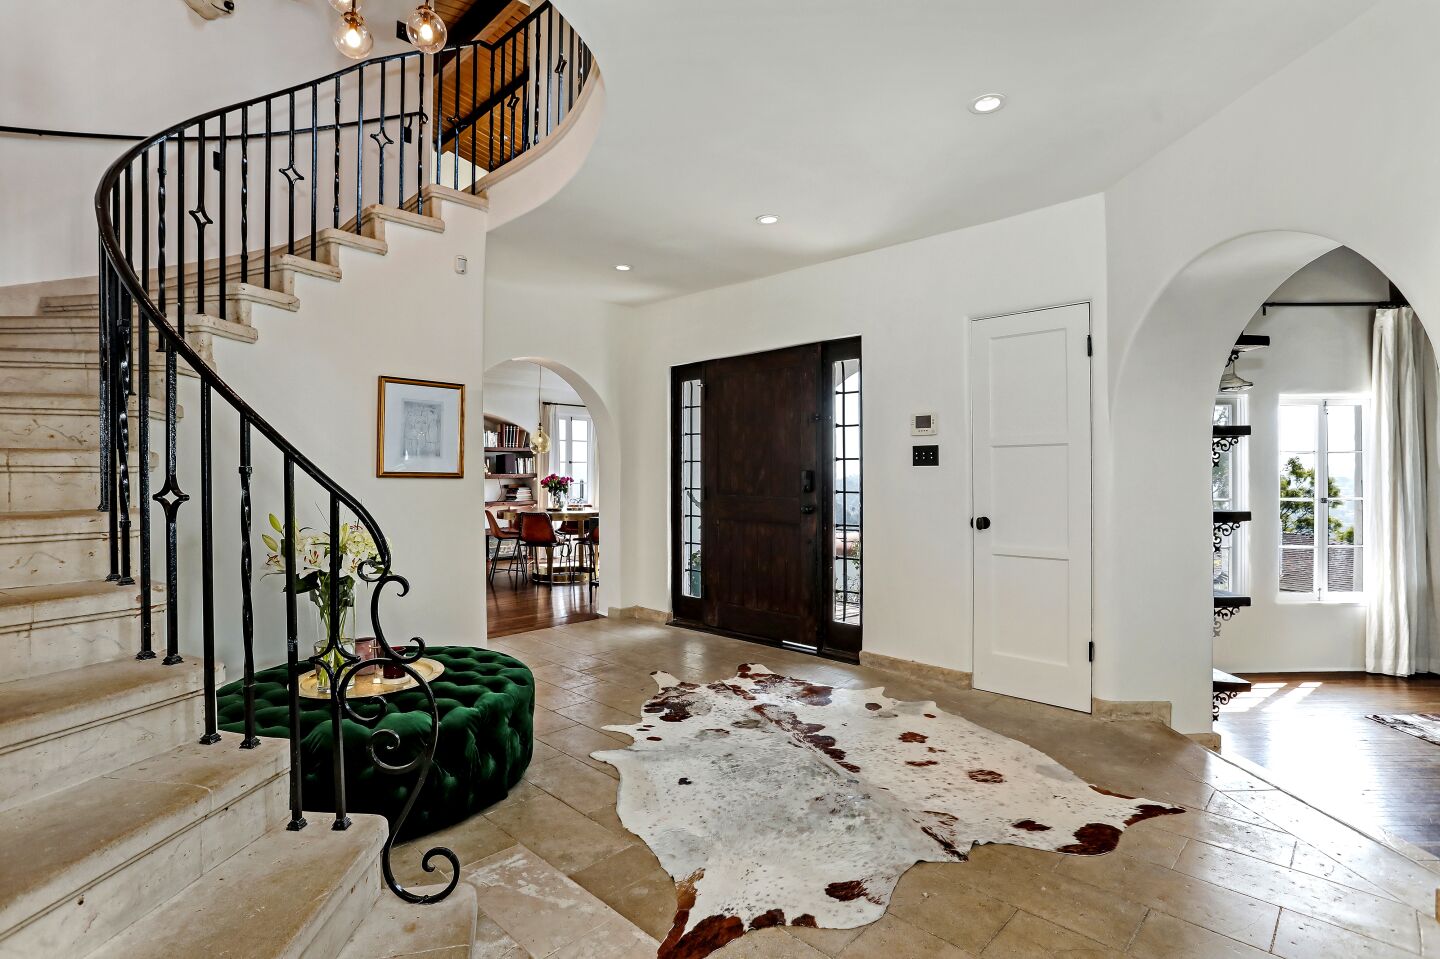 Stonework and a hand-forged staircase in the entry are original.